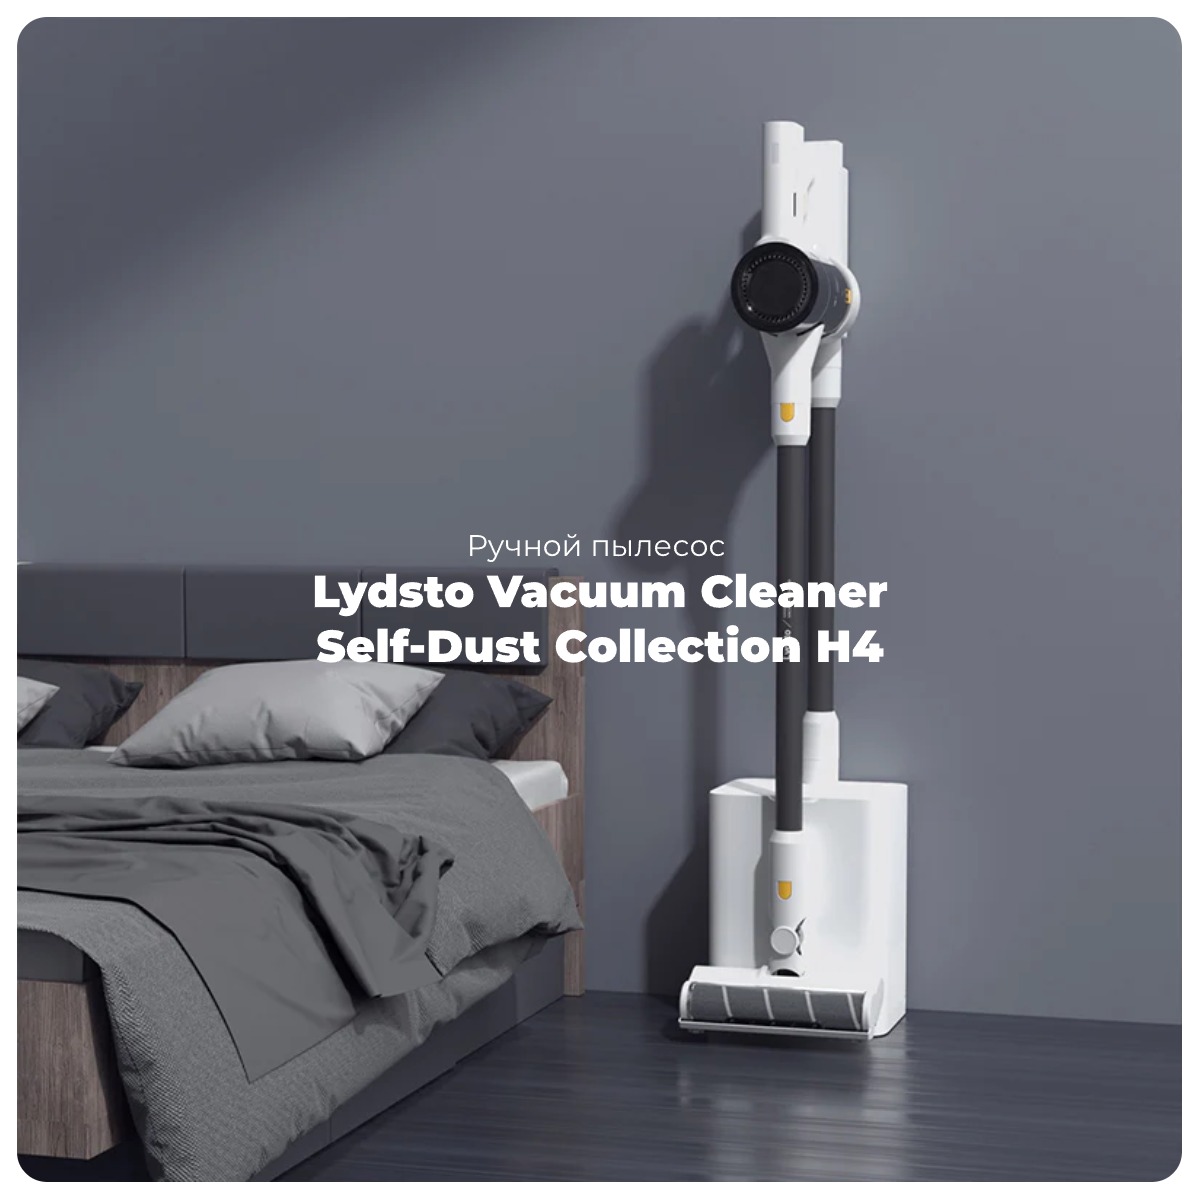 Lydsto-Vacuum-Cleaner-Self-Dust-Collection-H4-01